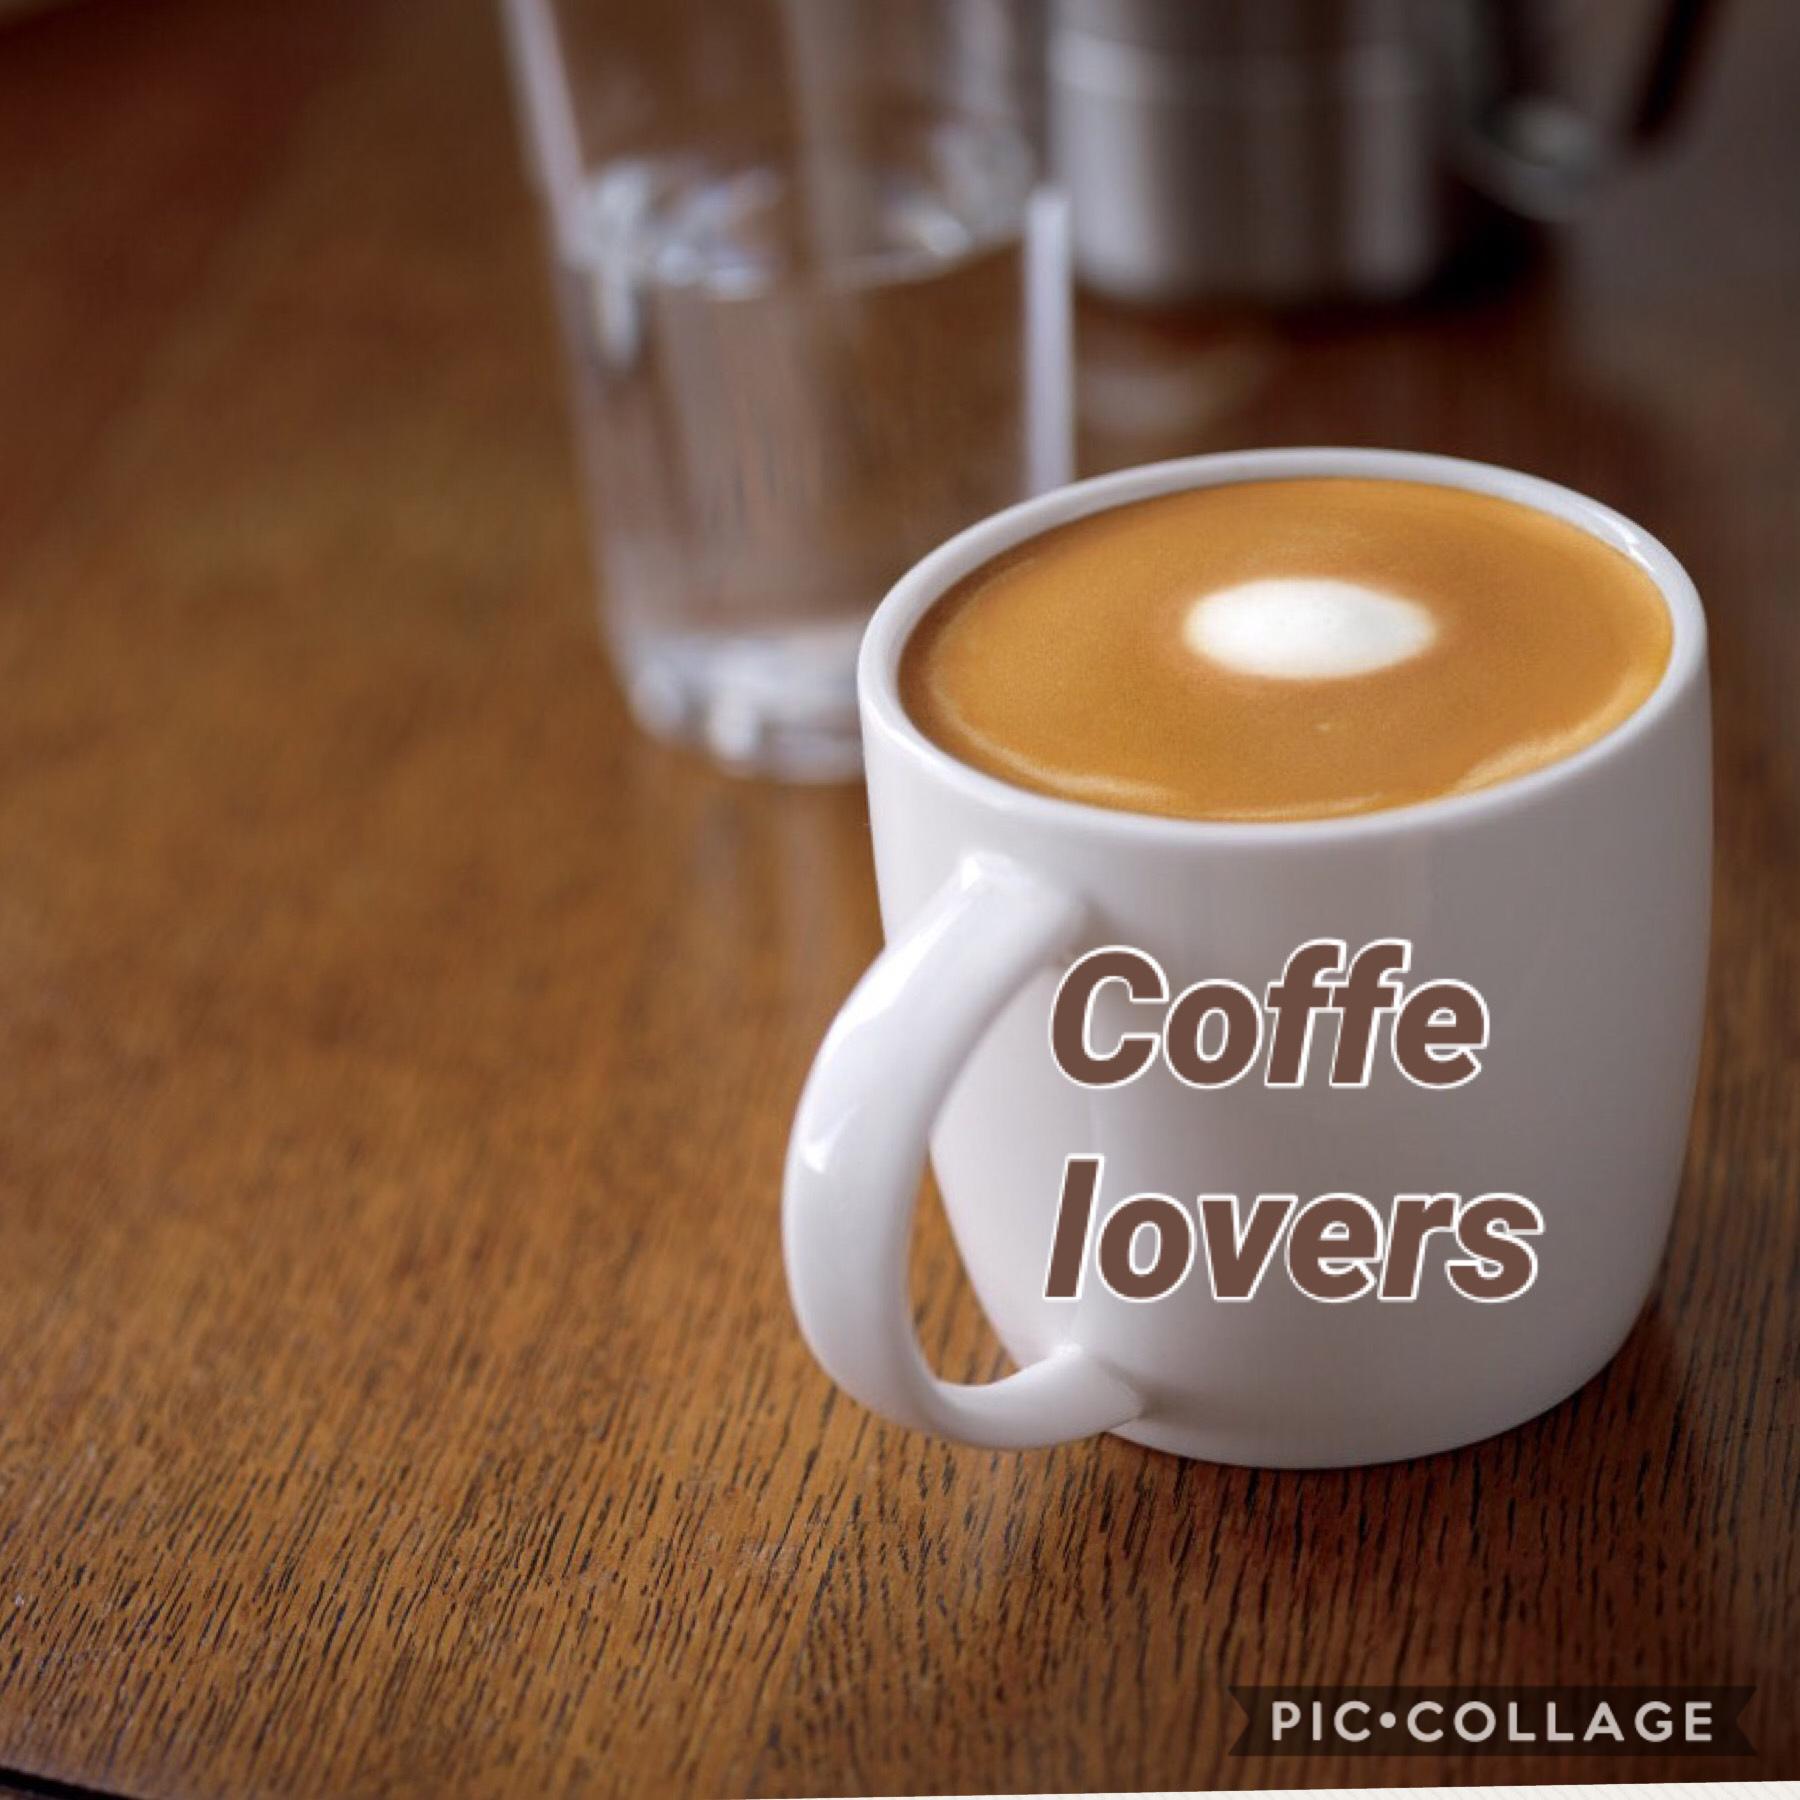 Who here likes coffe?